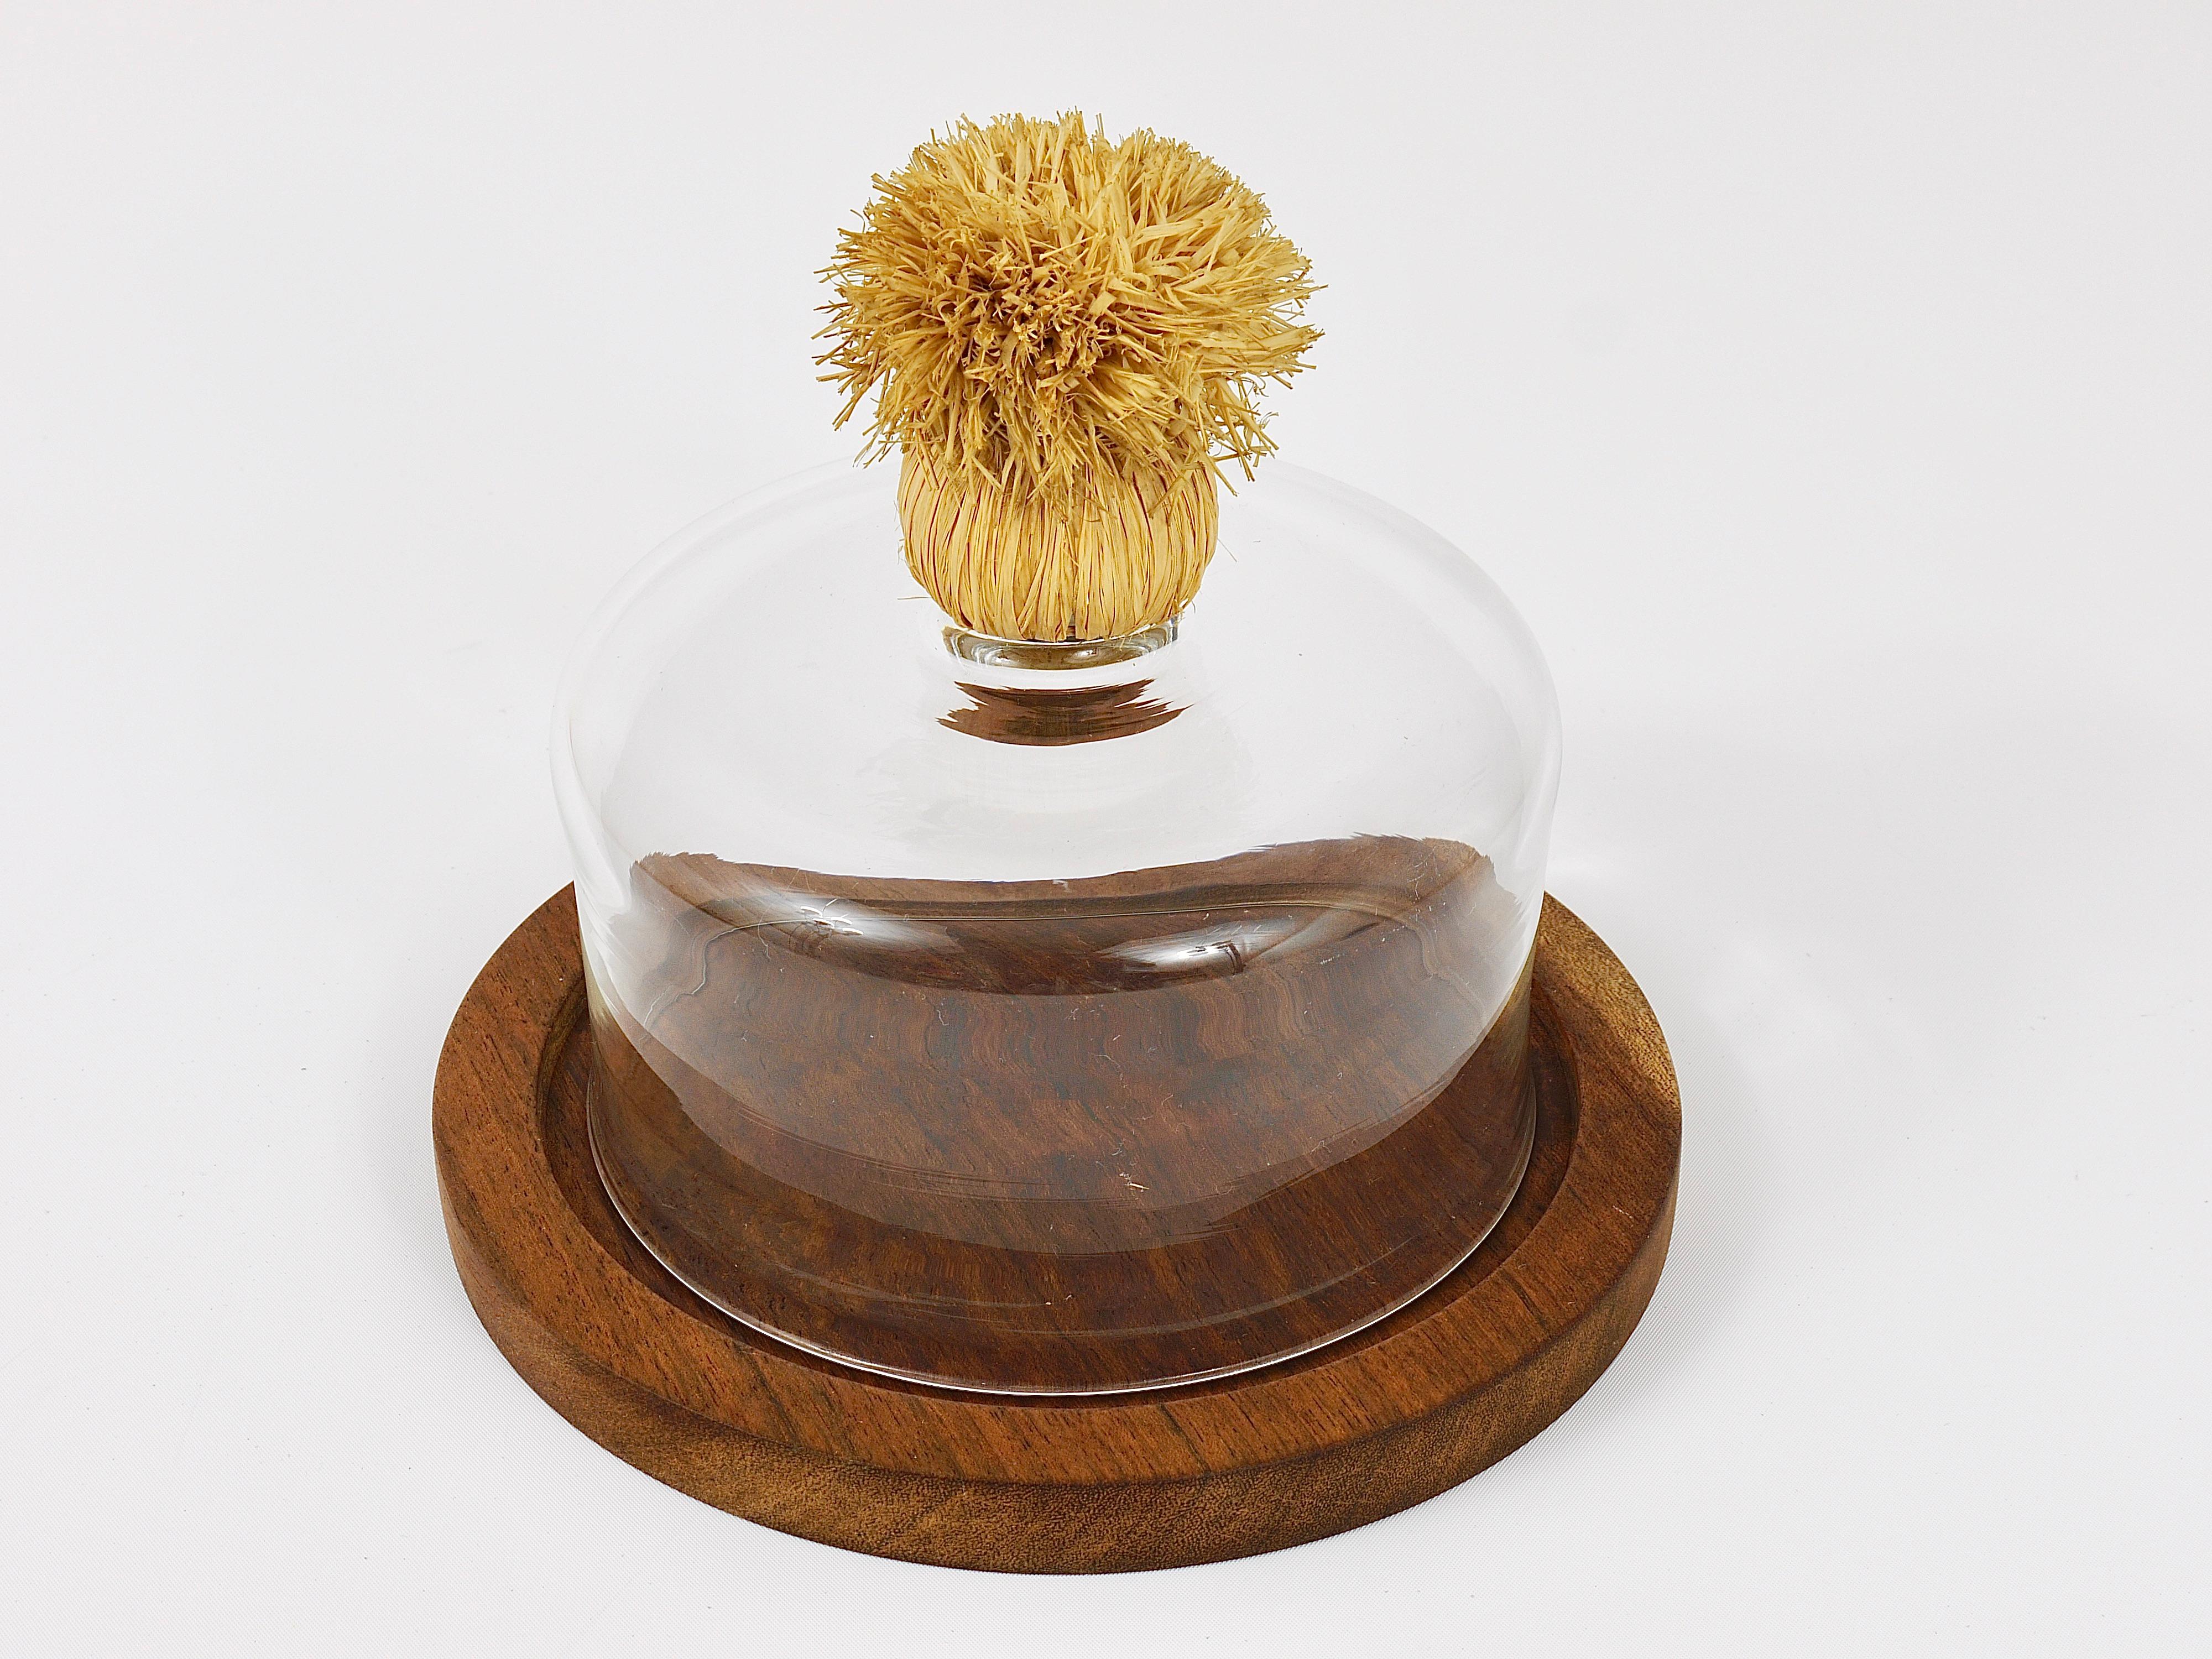 A beautiful midcentury walnut cheese board with a glass dome and a raffia handle from the 1950s. Designed and executed by Carl Auböck. The total diameter is 8 inches, the glass dome has a diameter of 6 inches and a height of 3 1/2 inches without the